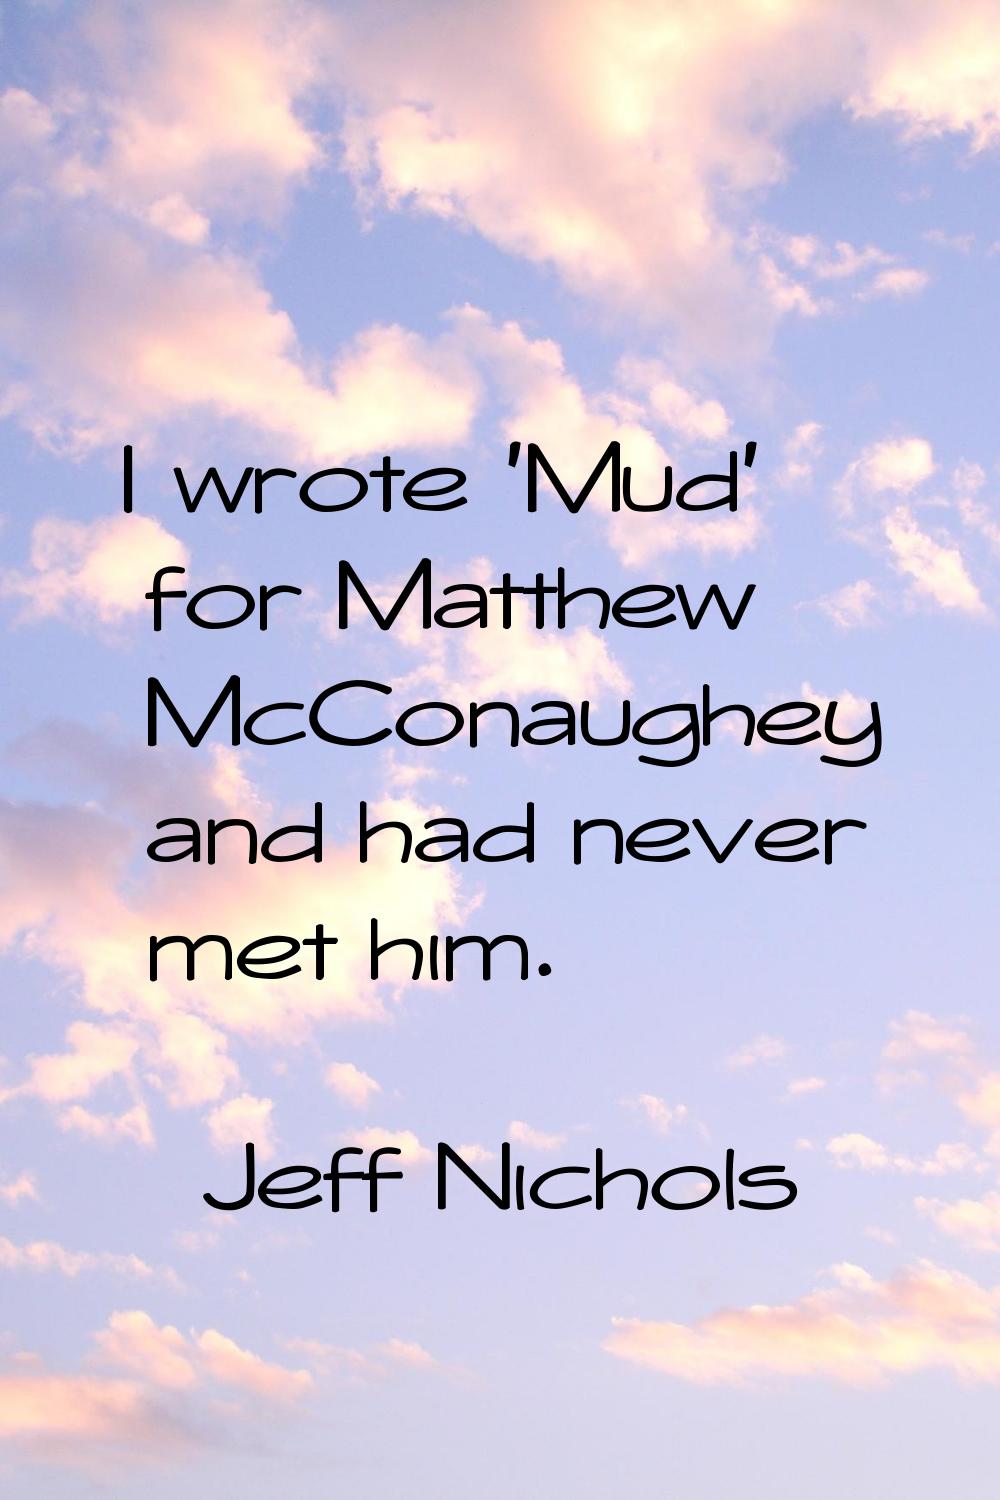 I wrote 'Mud' for Matthew McConaughey and had never met him.